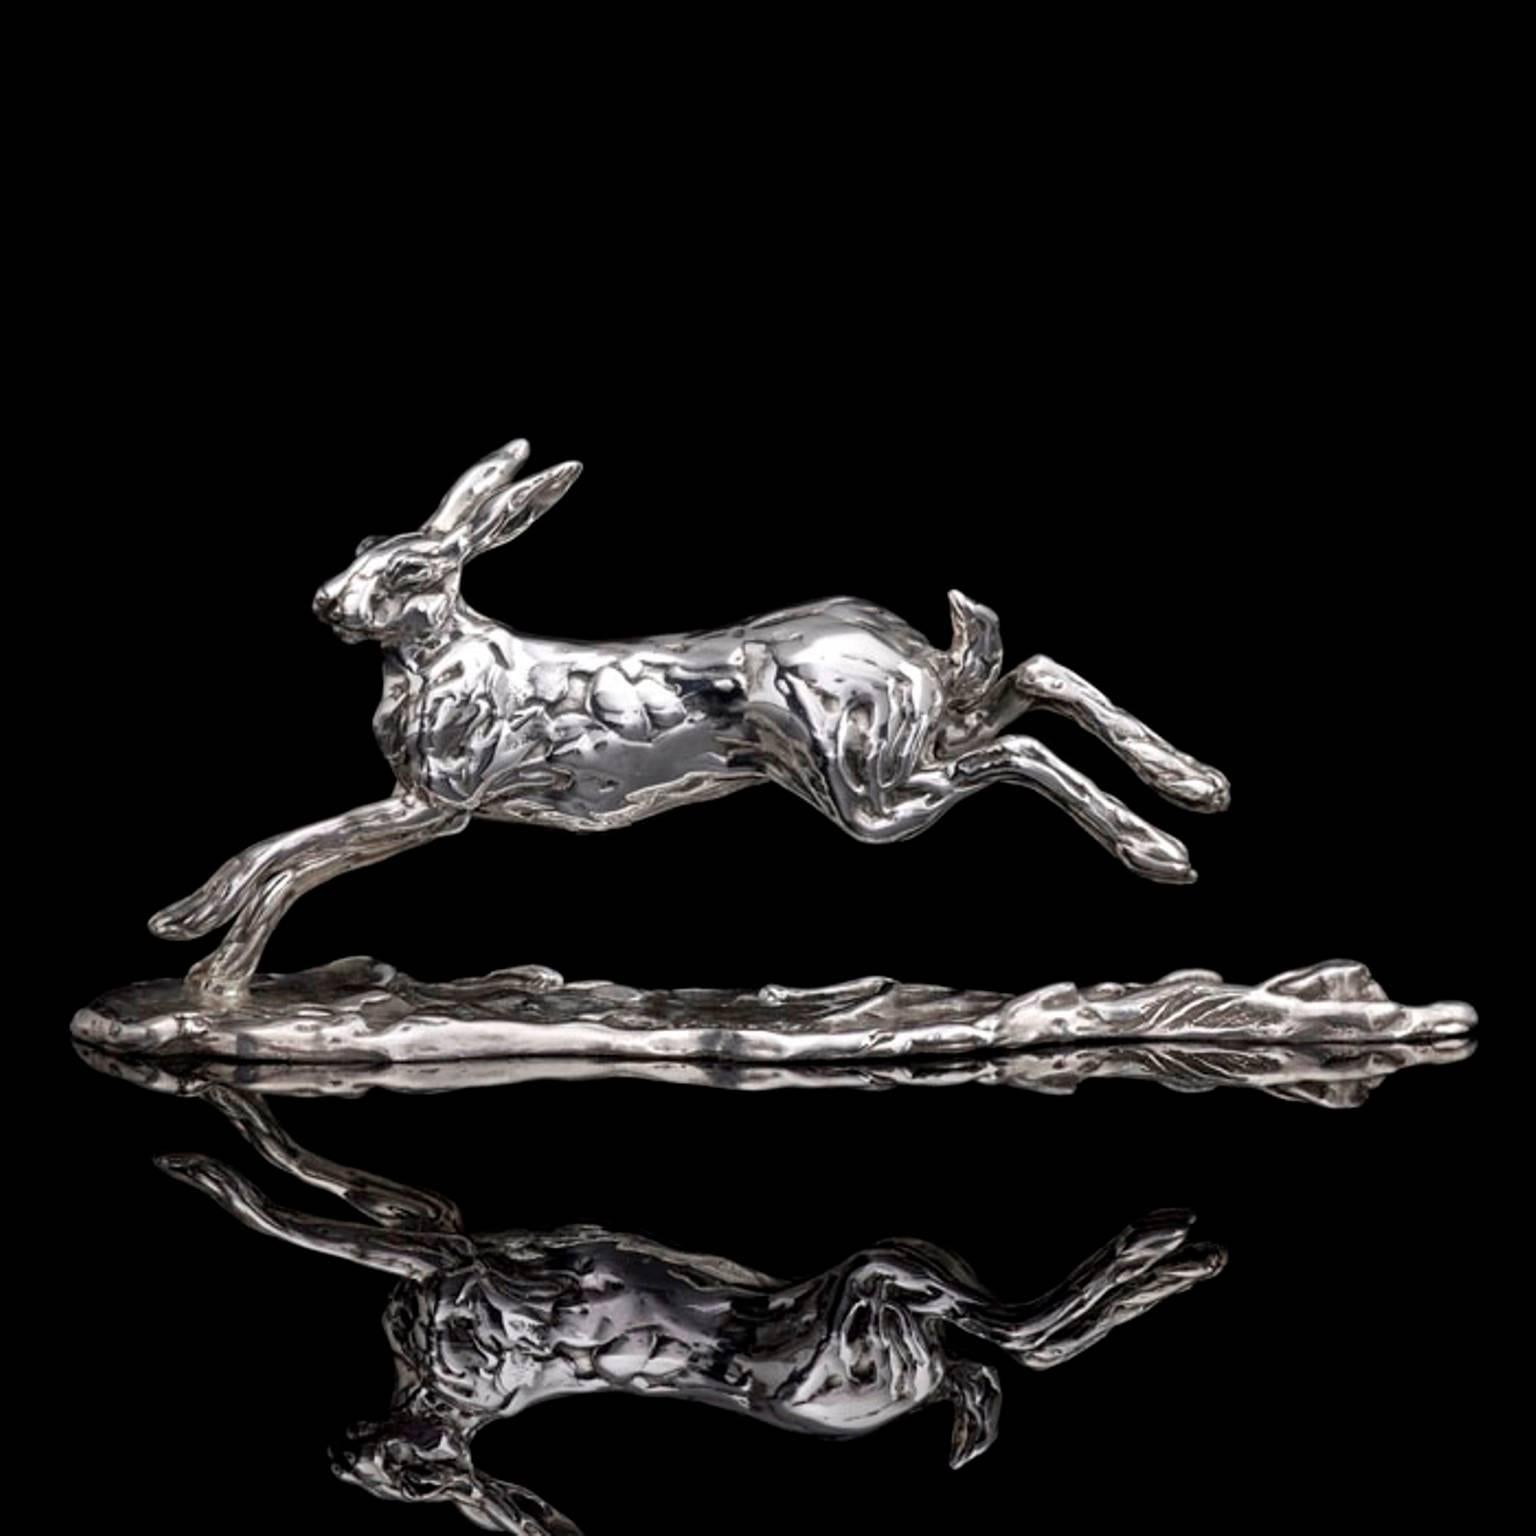 Running Hare - Sculpture by Lucy Kinsella